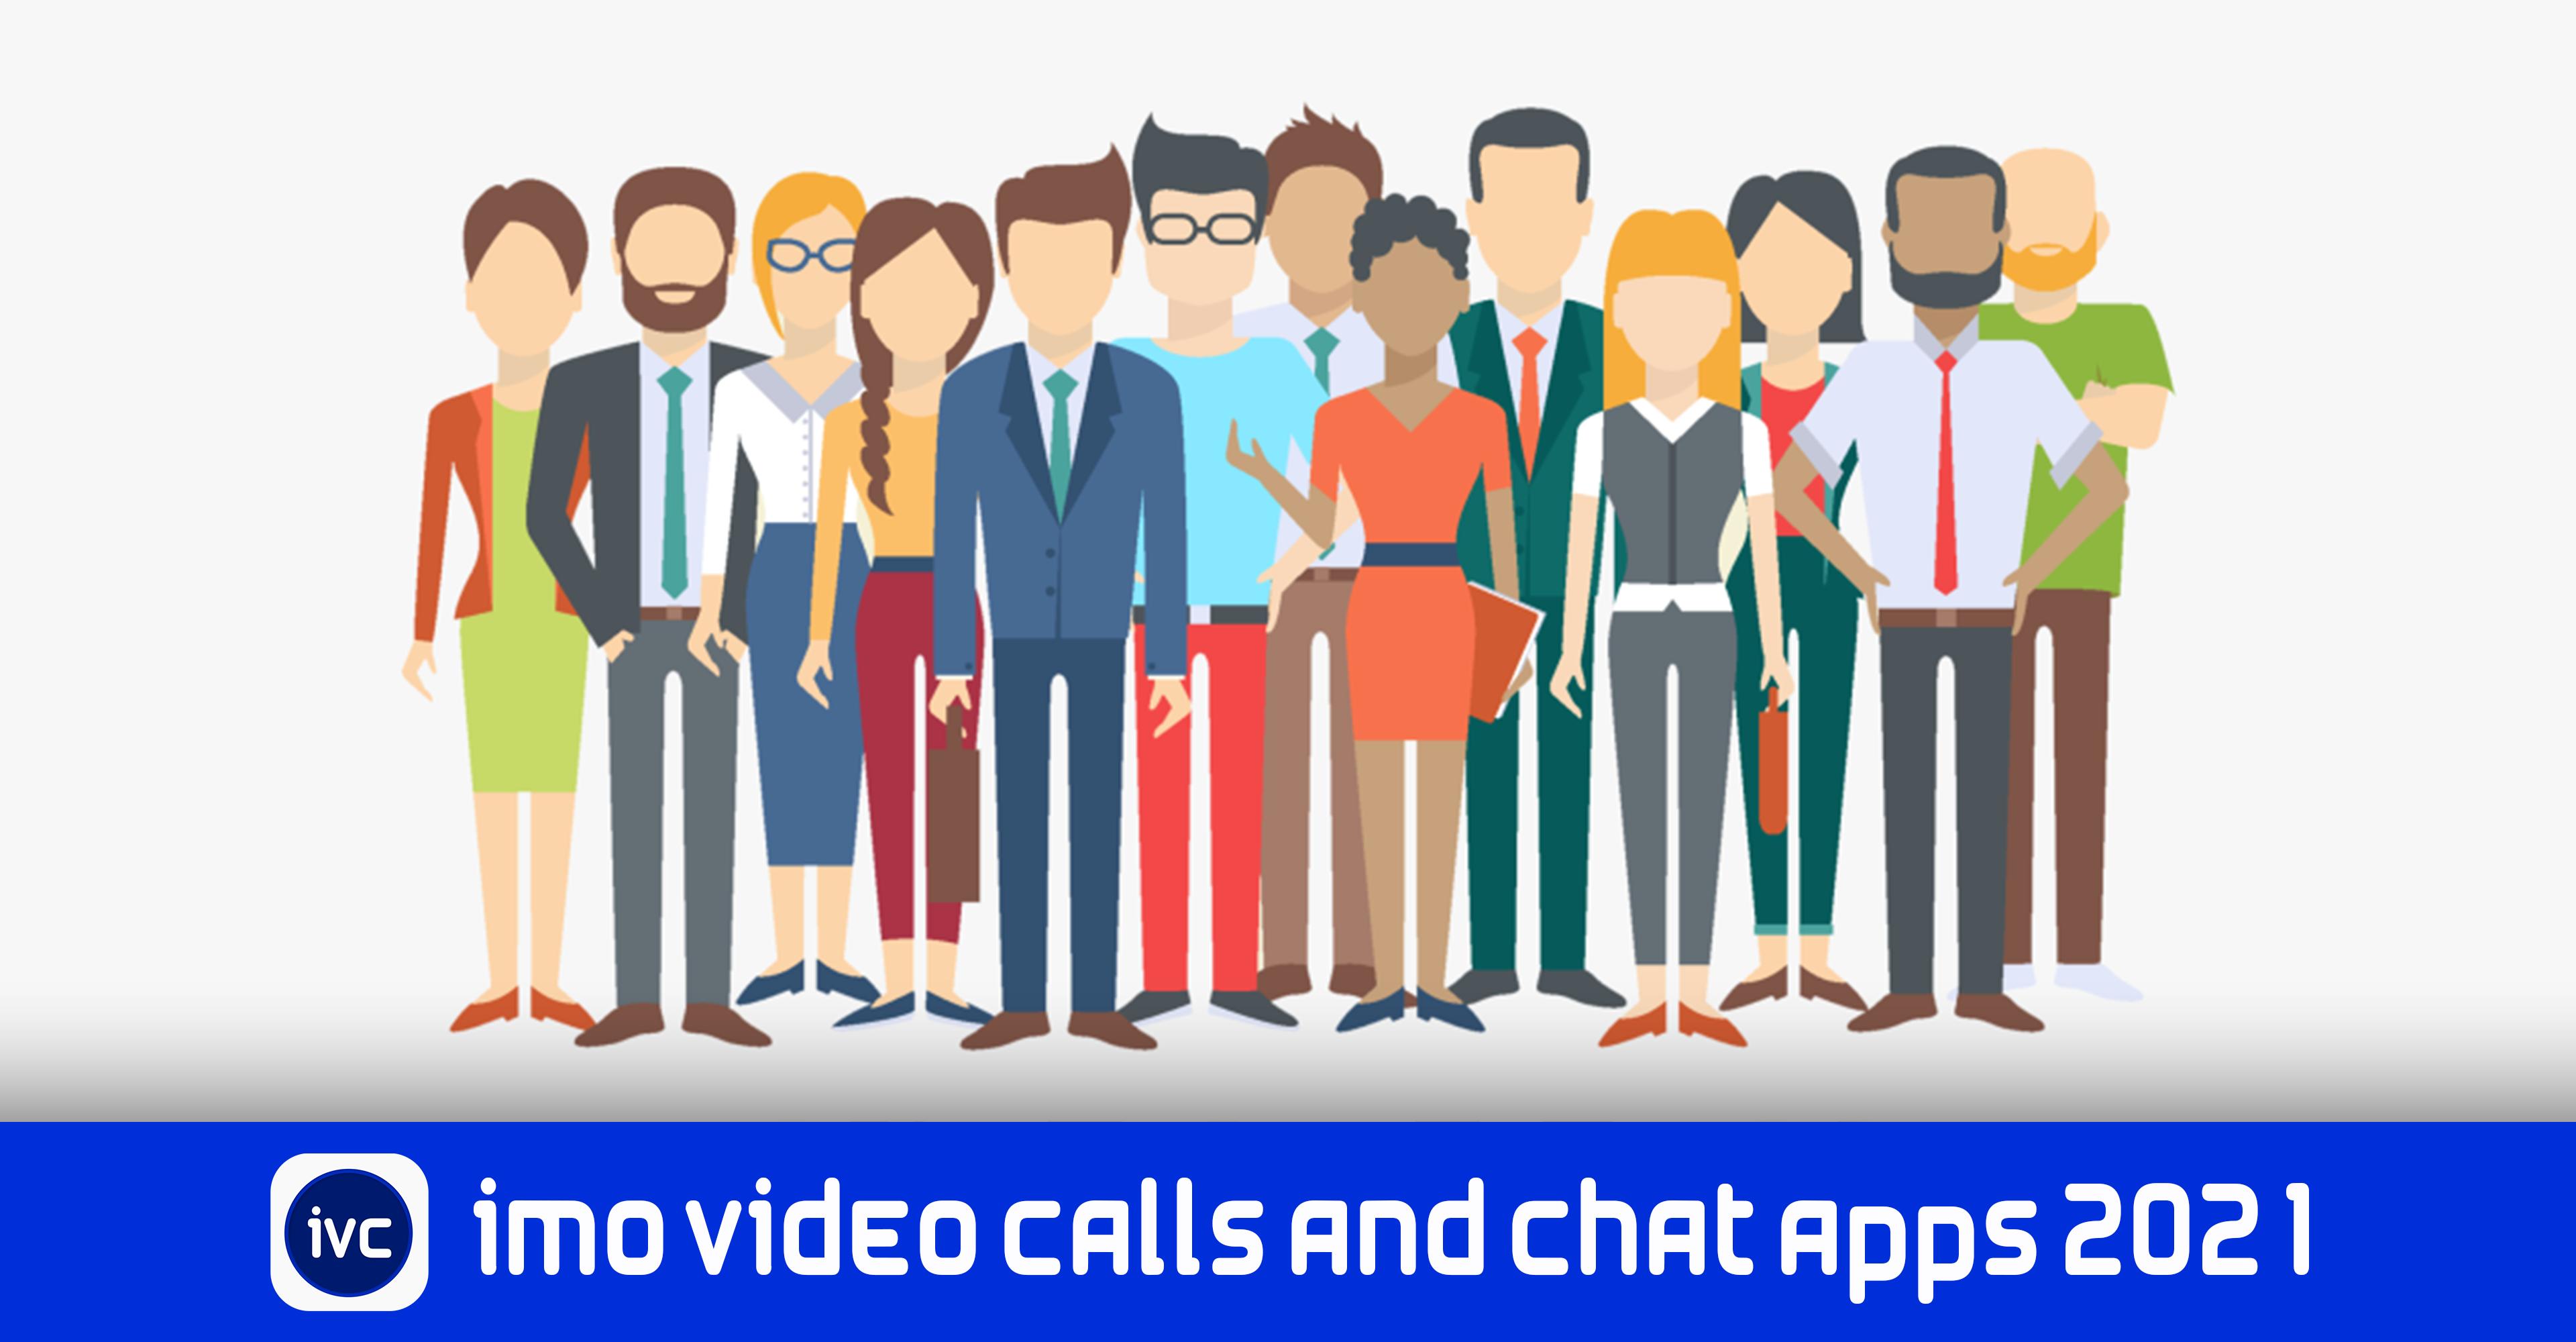 imo video calls and chat apps 2021 1.1.1.1 Screenshot 2